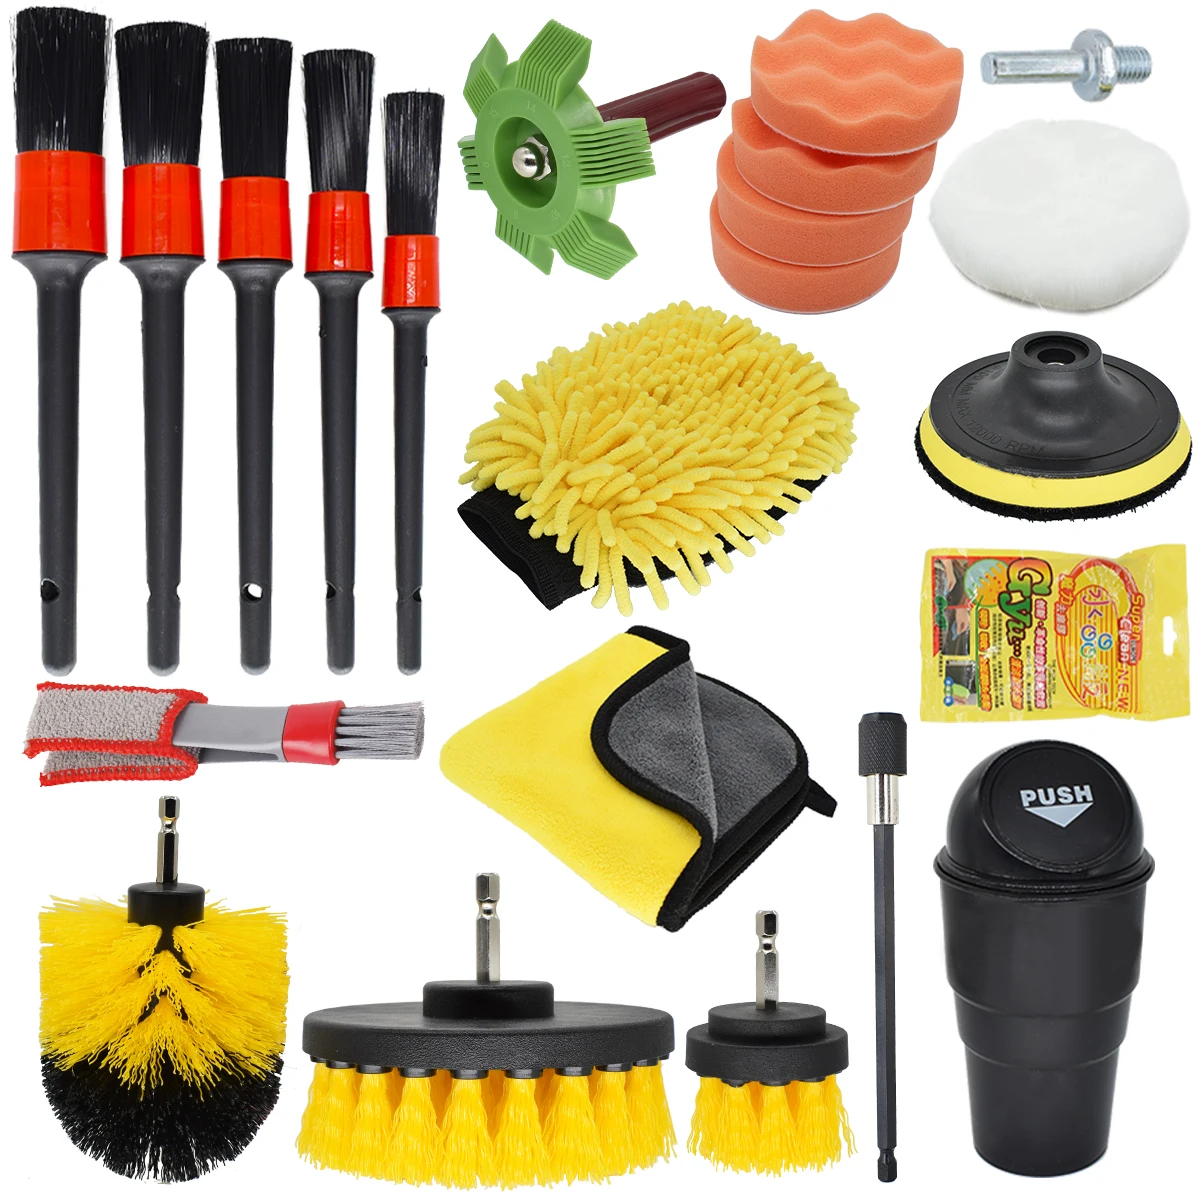 Car Cleaning Kit Scrubber Drill Detailing Brush Set Air Conditioner Vents Towel Washing Gloves Polisher Adapter Vacuum Cleaner